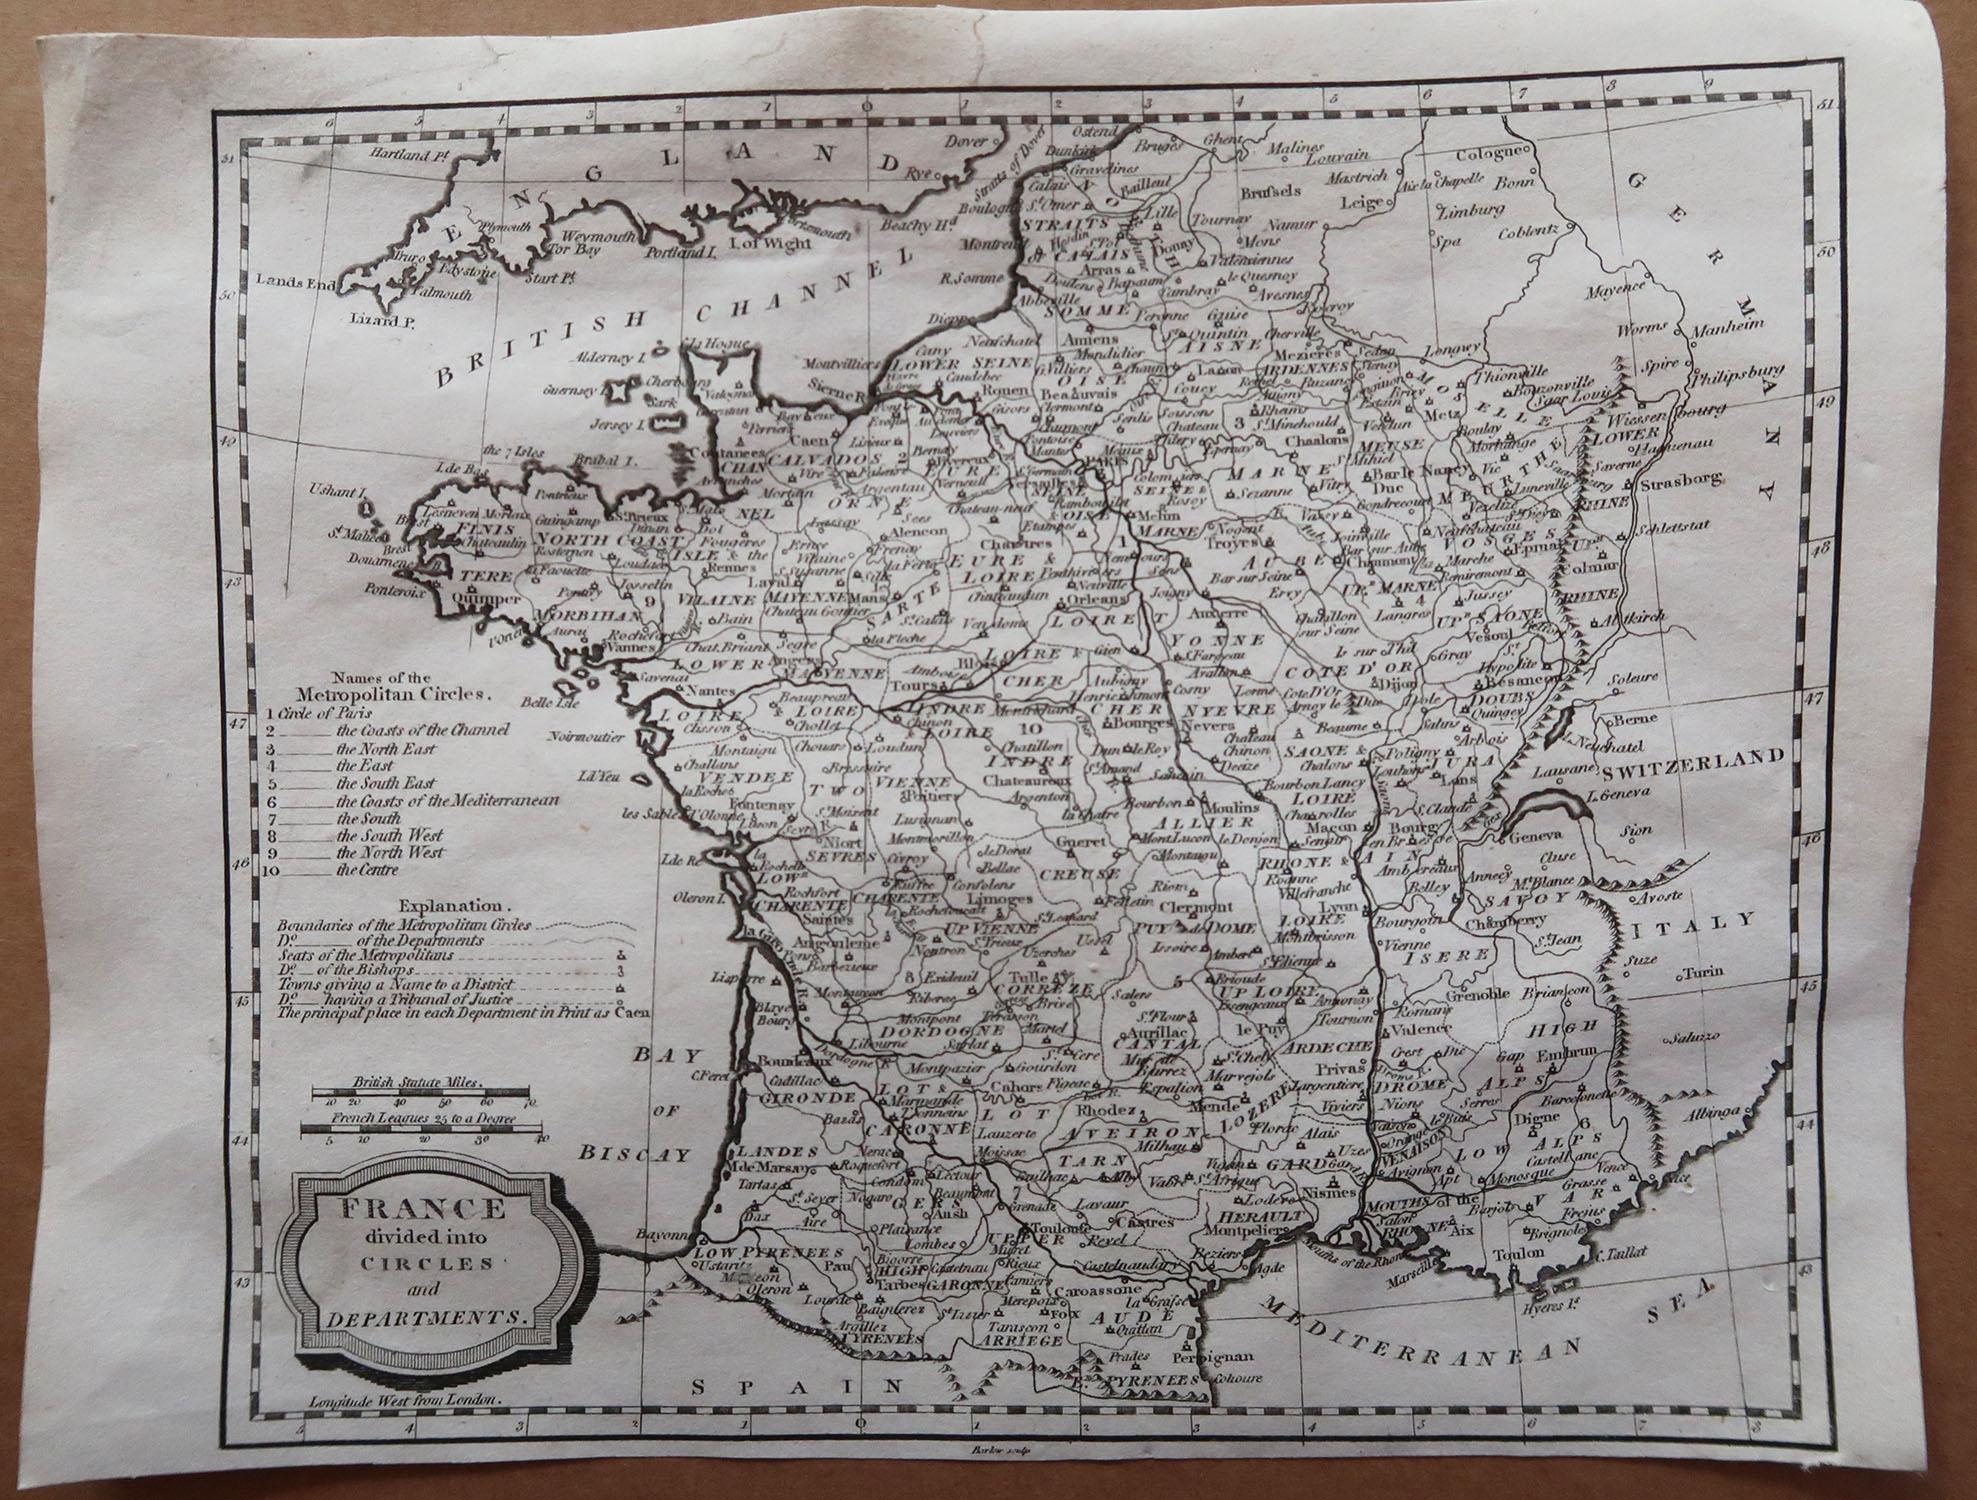 Other Original Antique Map of France, Engraved by Barlow, 1806